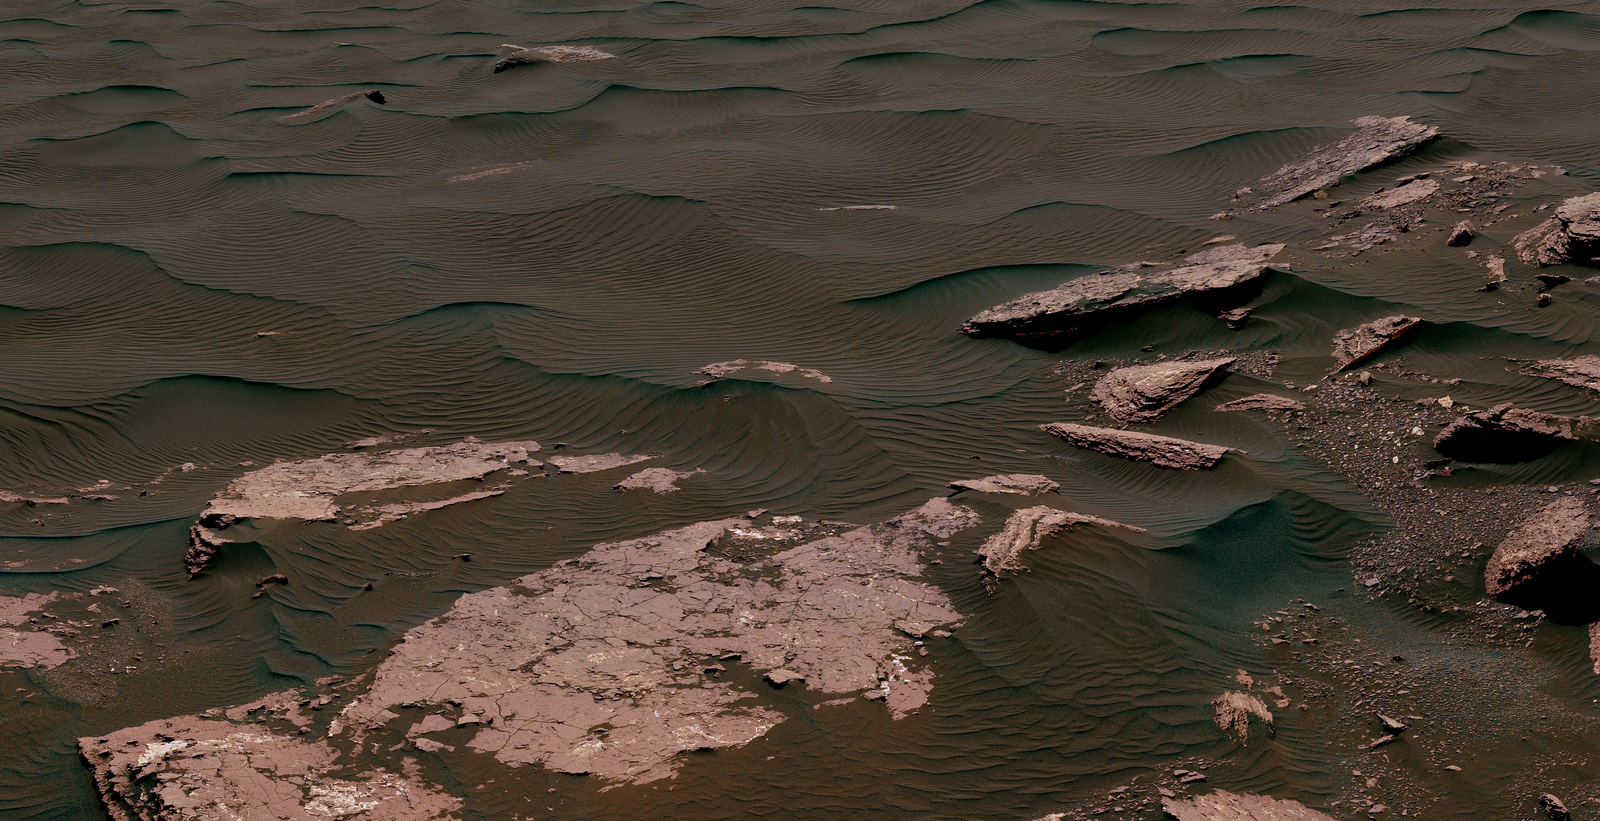 This view from the Mast Camera (Mastcam) on NASA's Curiosity Mars rover shows two scales of ripples, plus other textures, in an area where the mission examined a linear-shaped dune in the Bagnold dune field on lower Mount Sharp in March and April 2017.